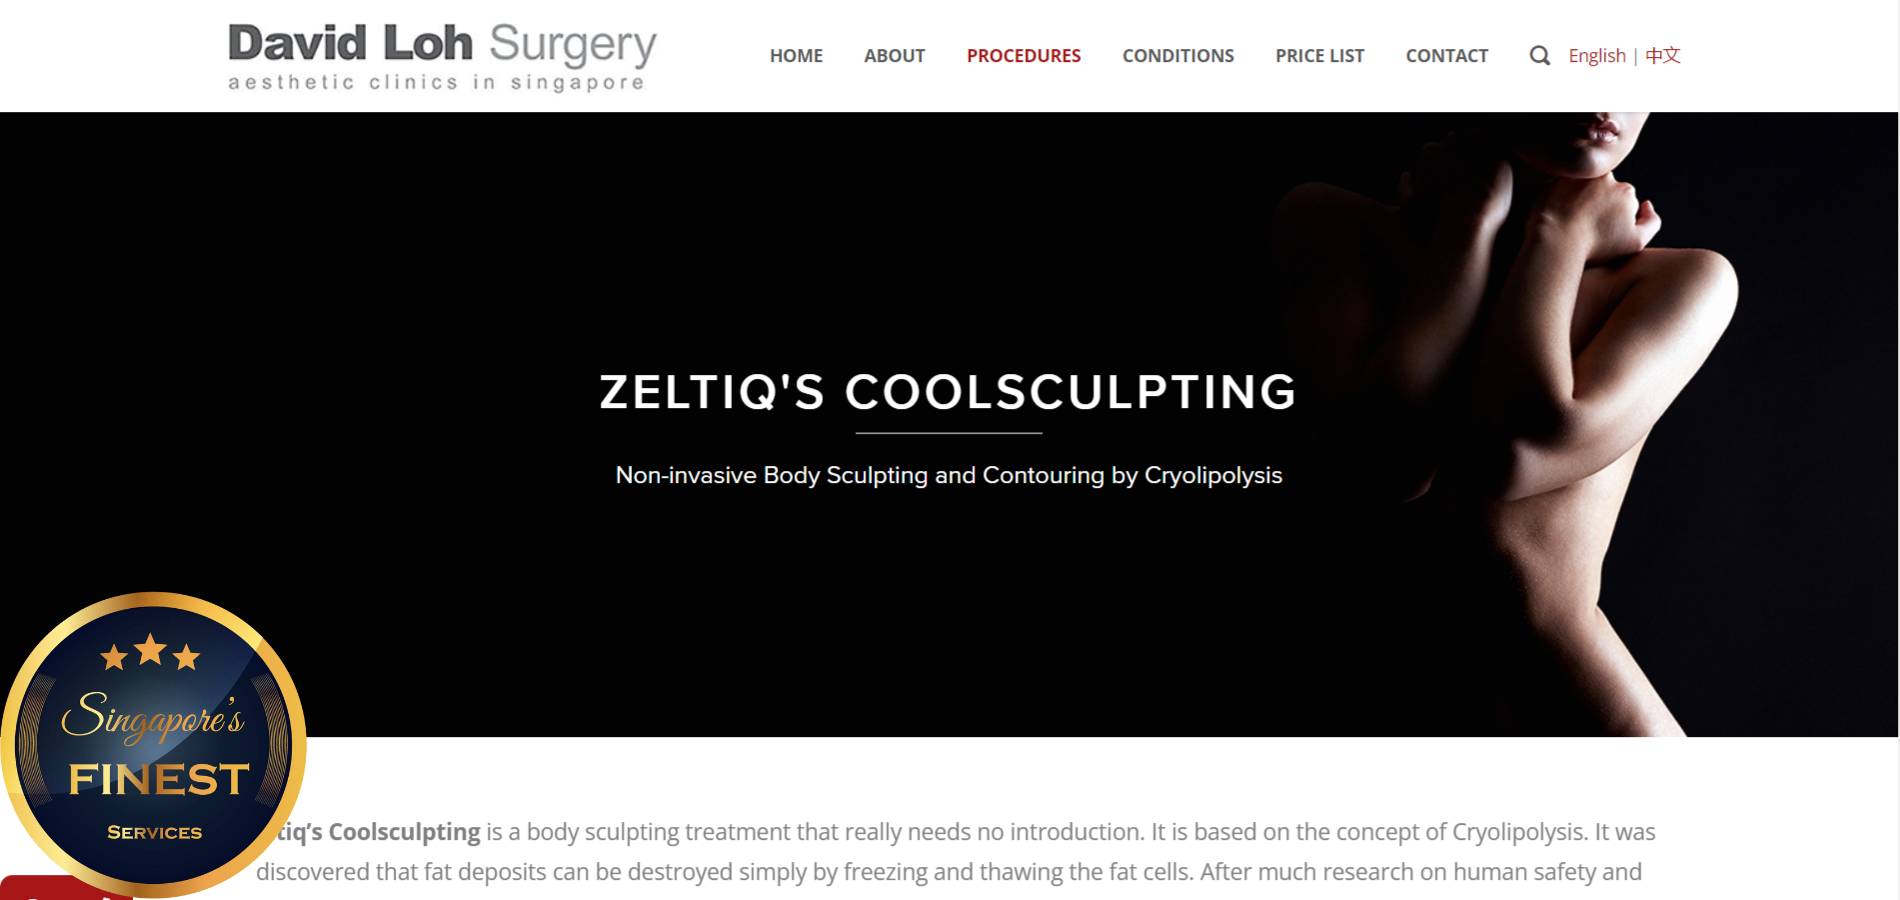 The Finest Coolsculpting in Singapore